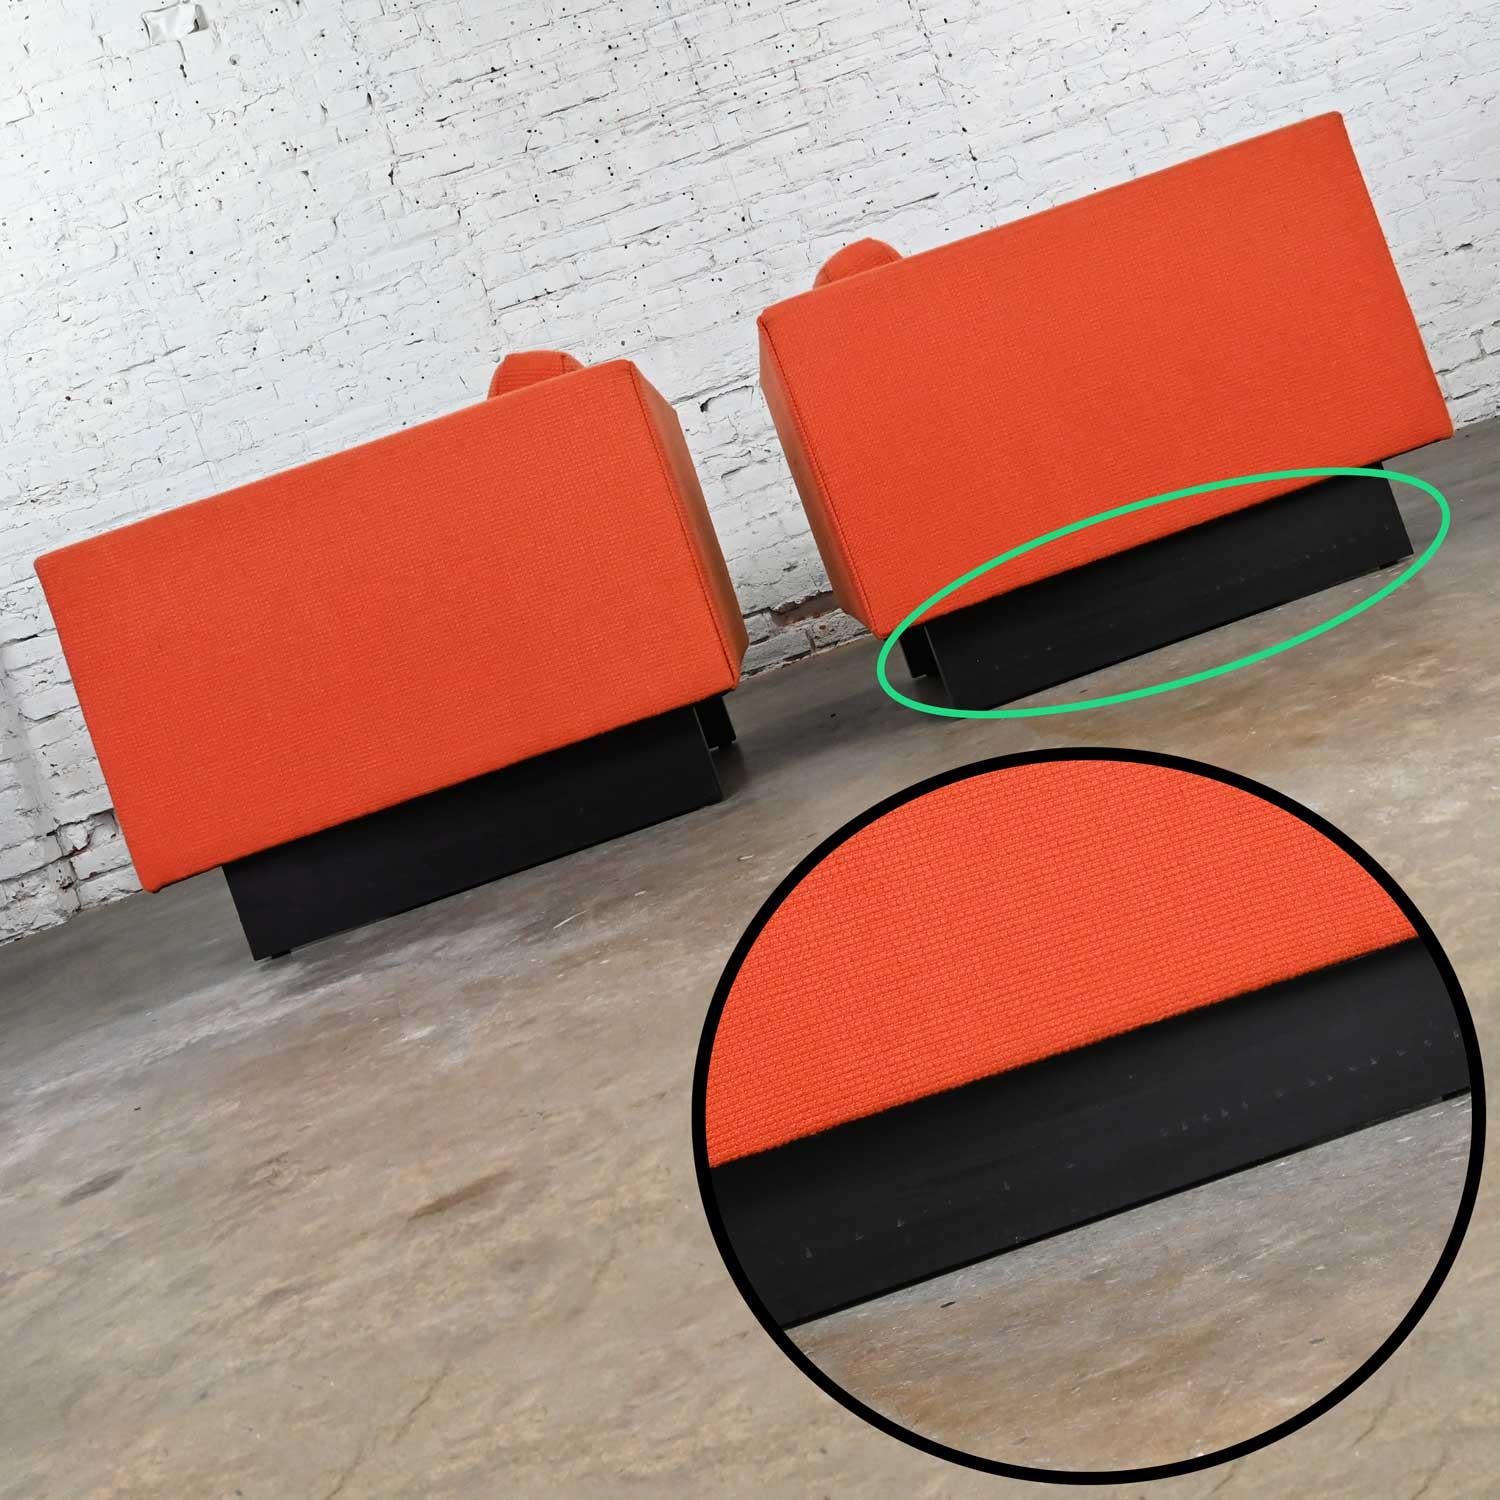 1970s Mcm to Modern Harvey Probber Club Chairs Orange 1571 Tuxedo Sleigh Bases For Sale 13